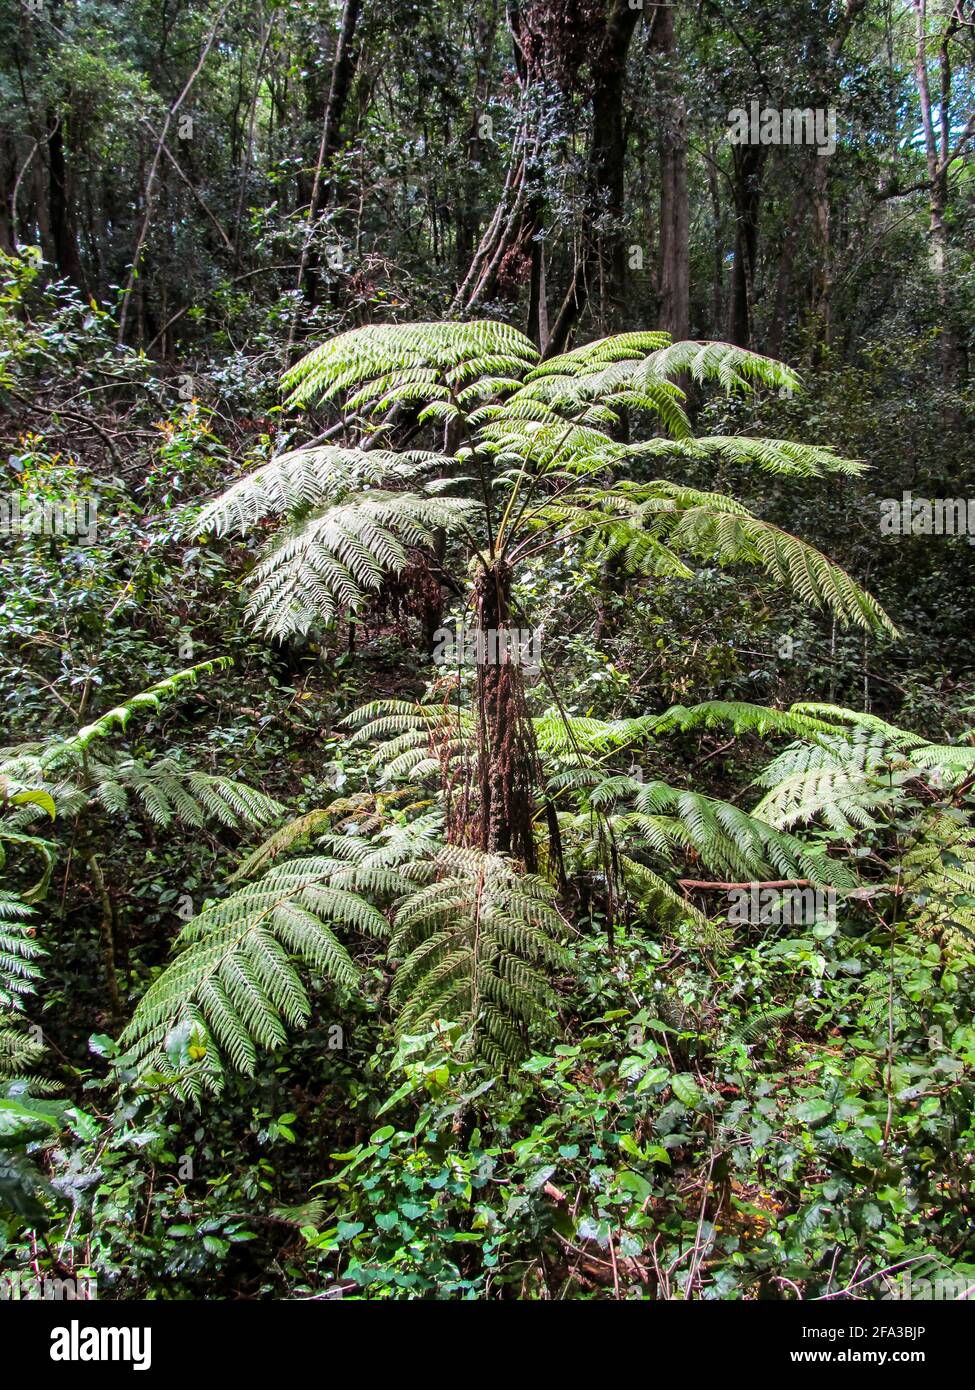 A large tree fern growing in a clearing in the Tsitsikamma rainforest in the Garden Route National Park, South Africa. Stock Photo